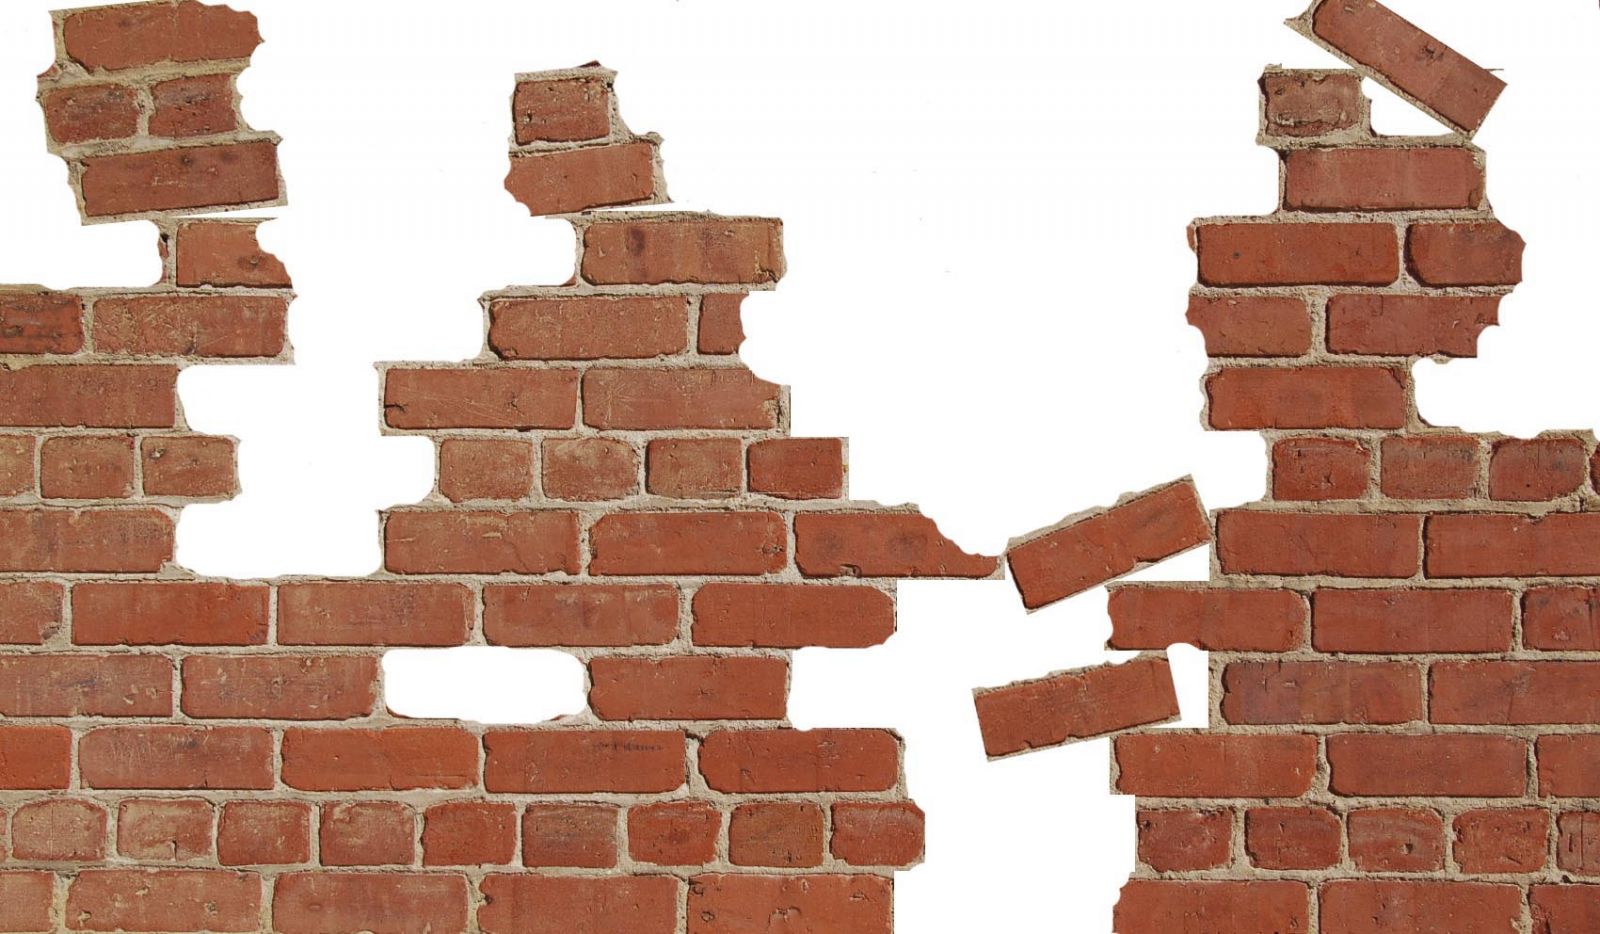 Learning Mathematics Is Like Building A Brick Wall